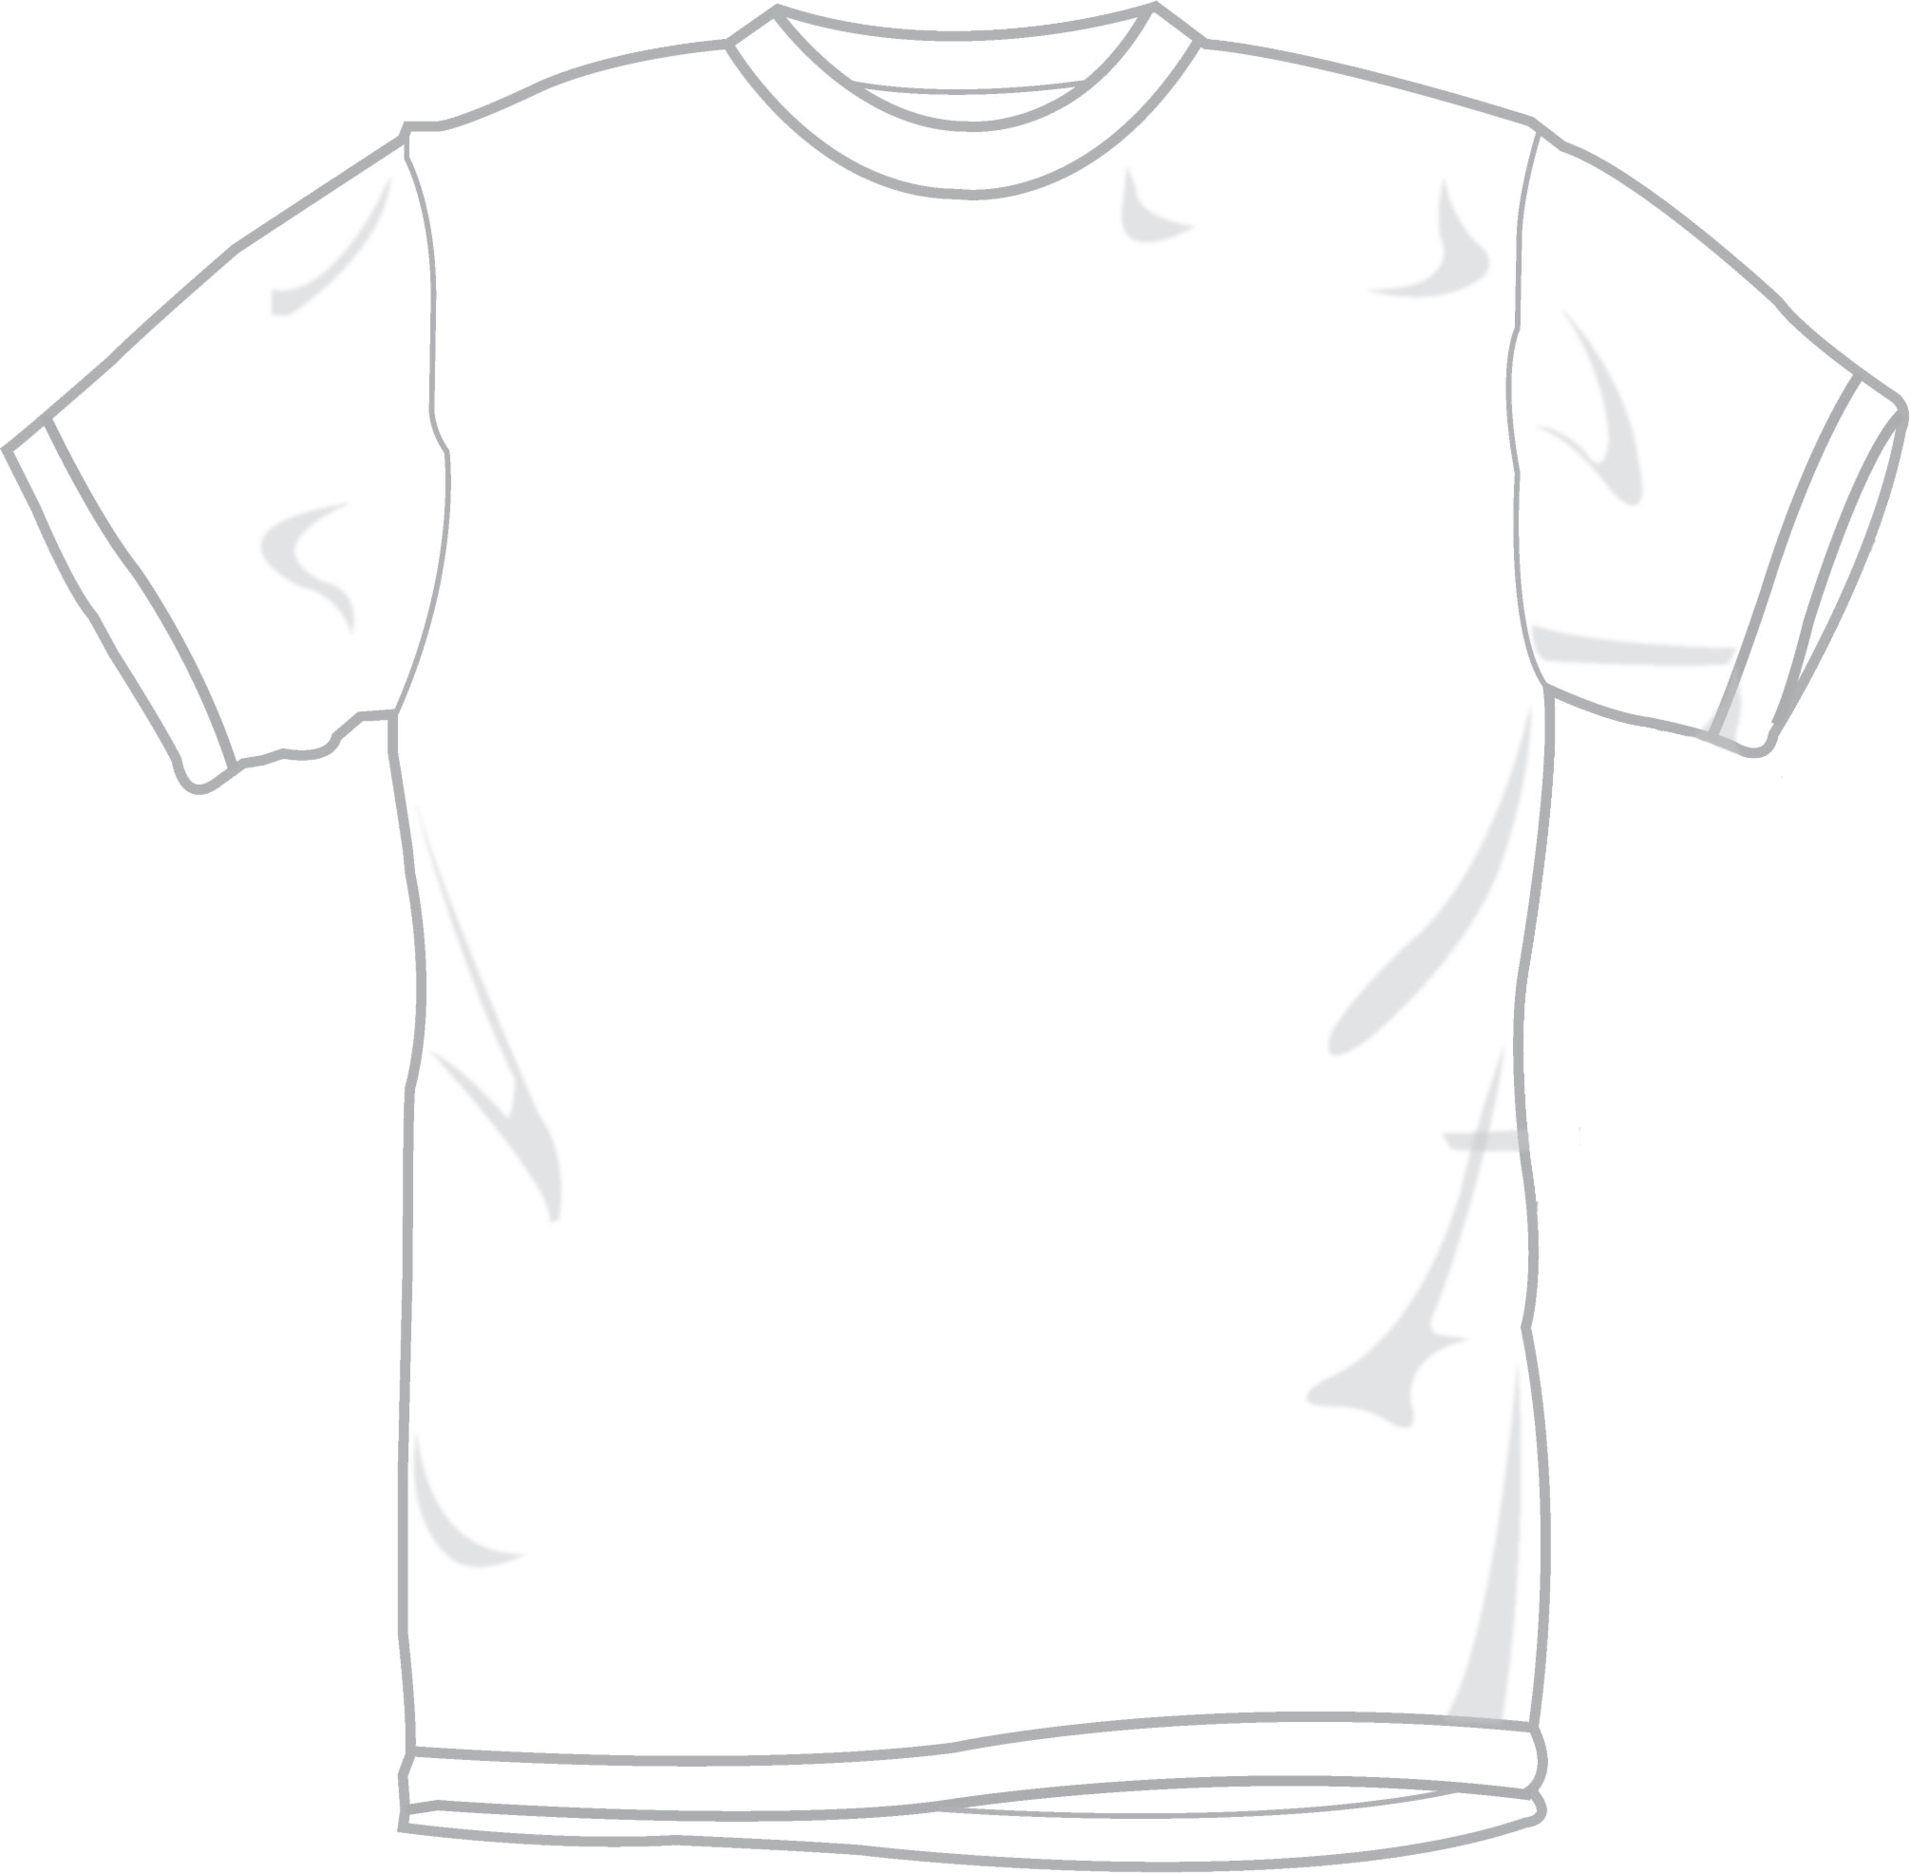 Download Blank White T Shirt Template | Wallpapers.com